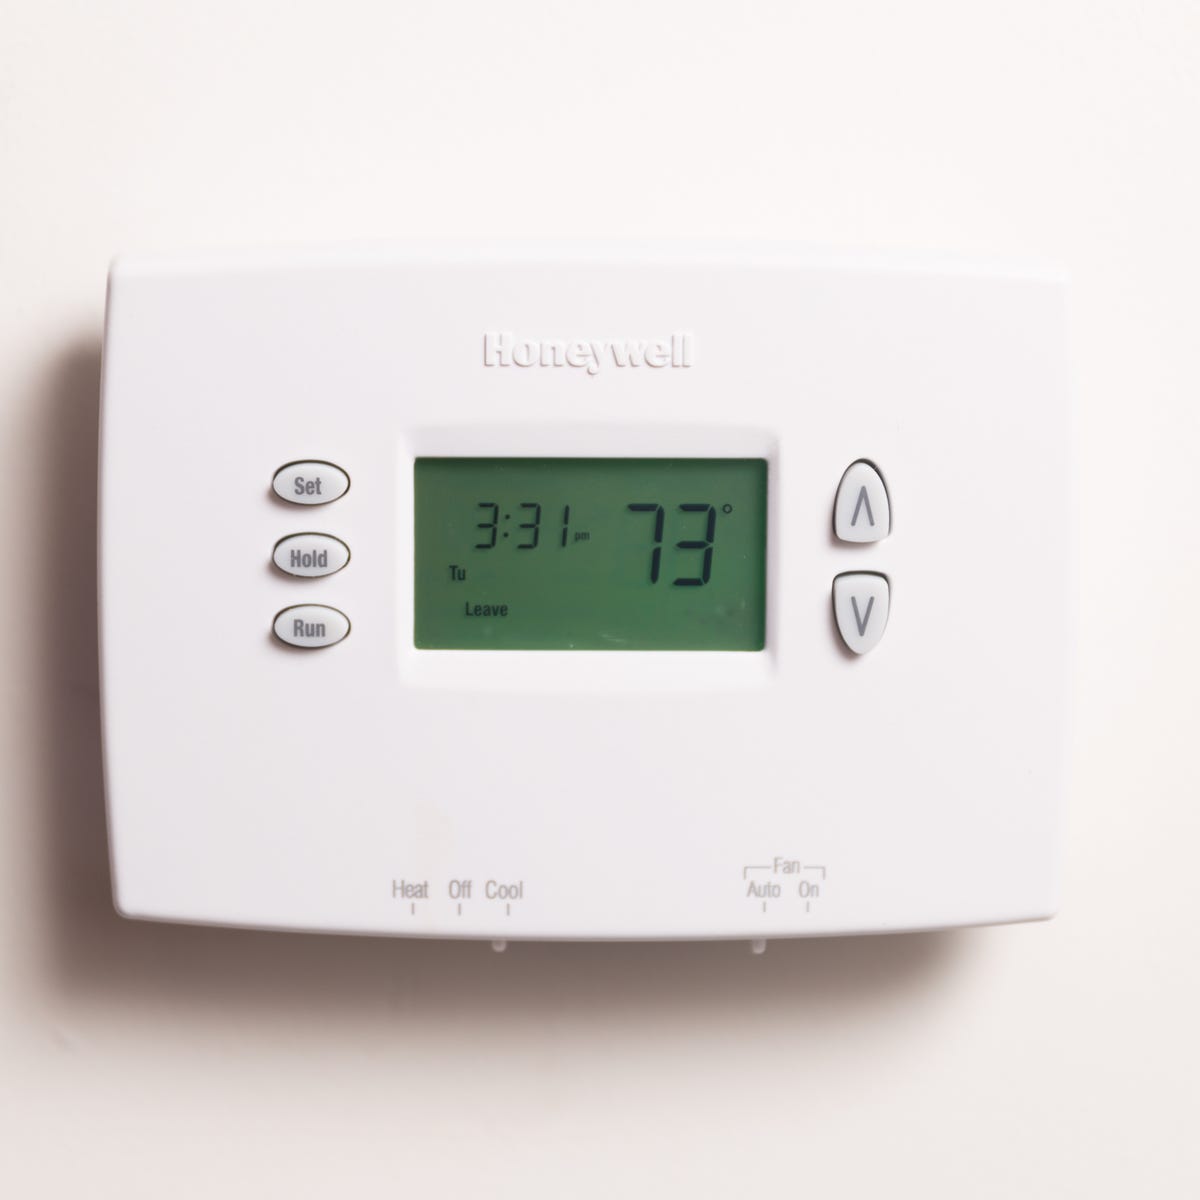 Honeywell RTHL2310B review: Have $25? This simple thermostat works just  fine - CNET